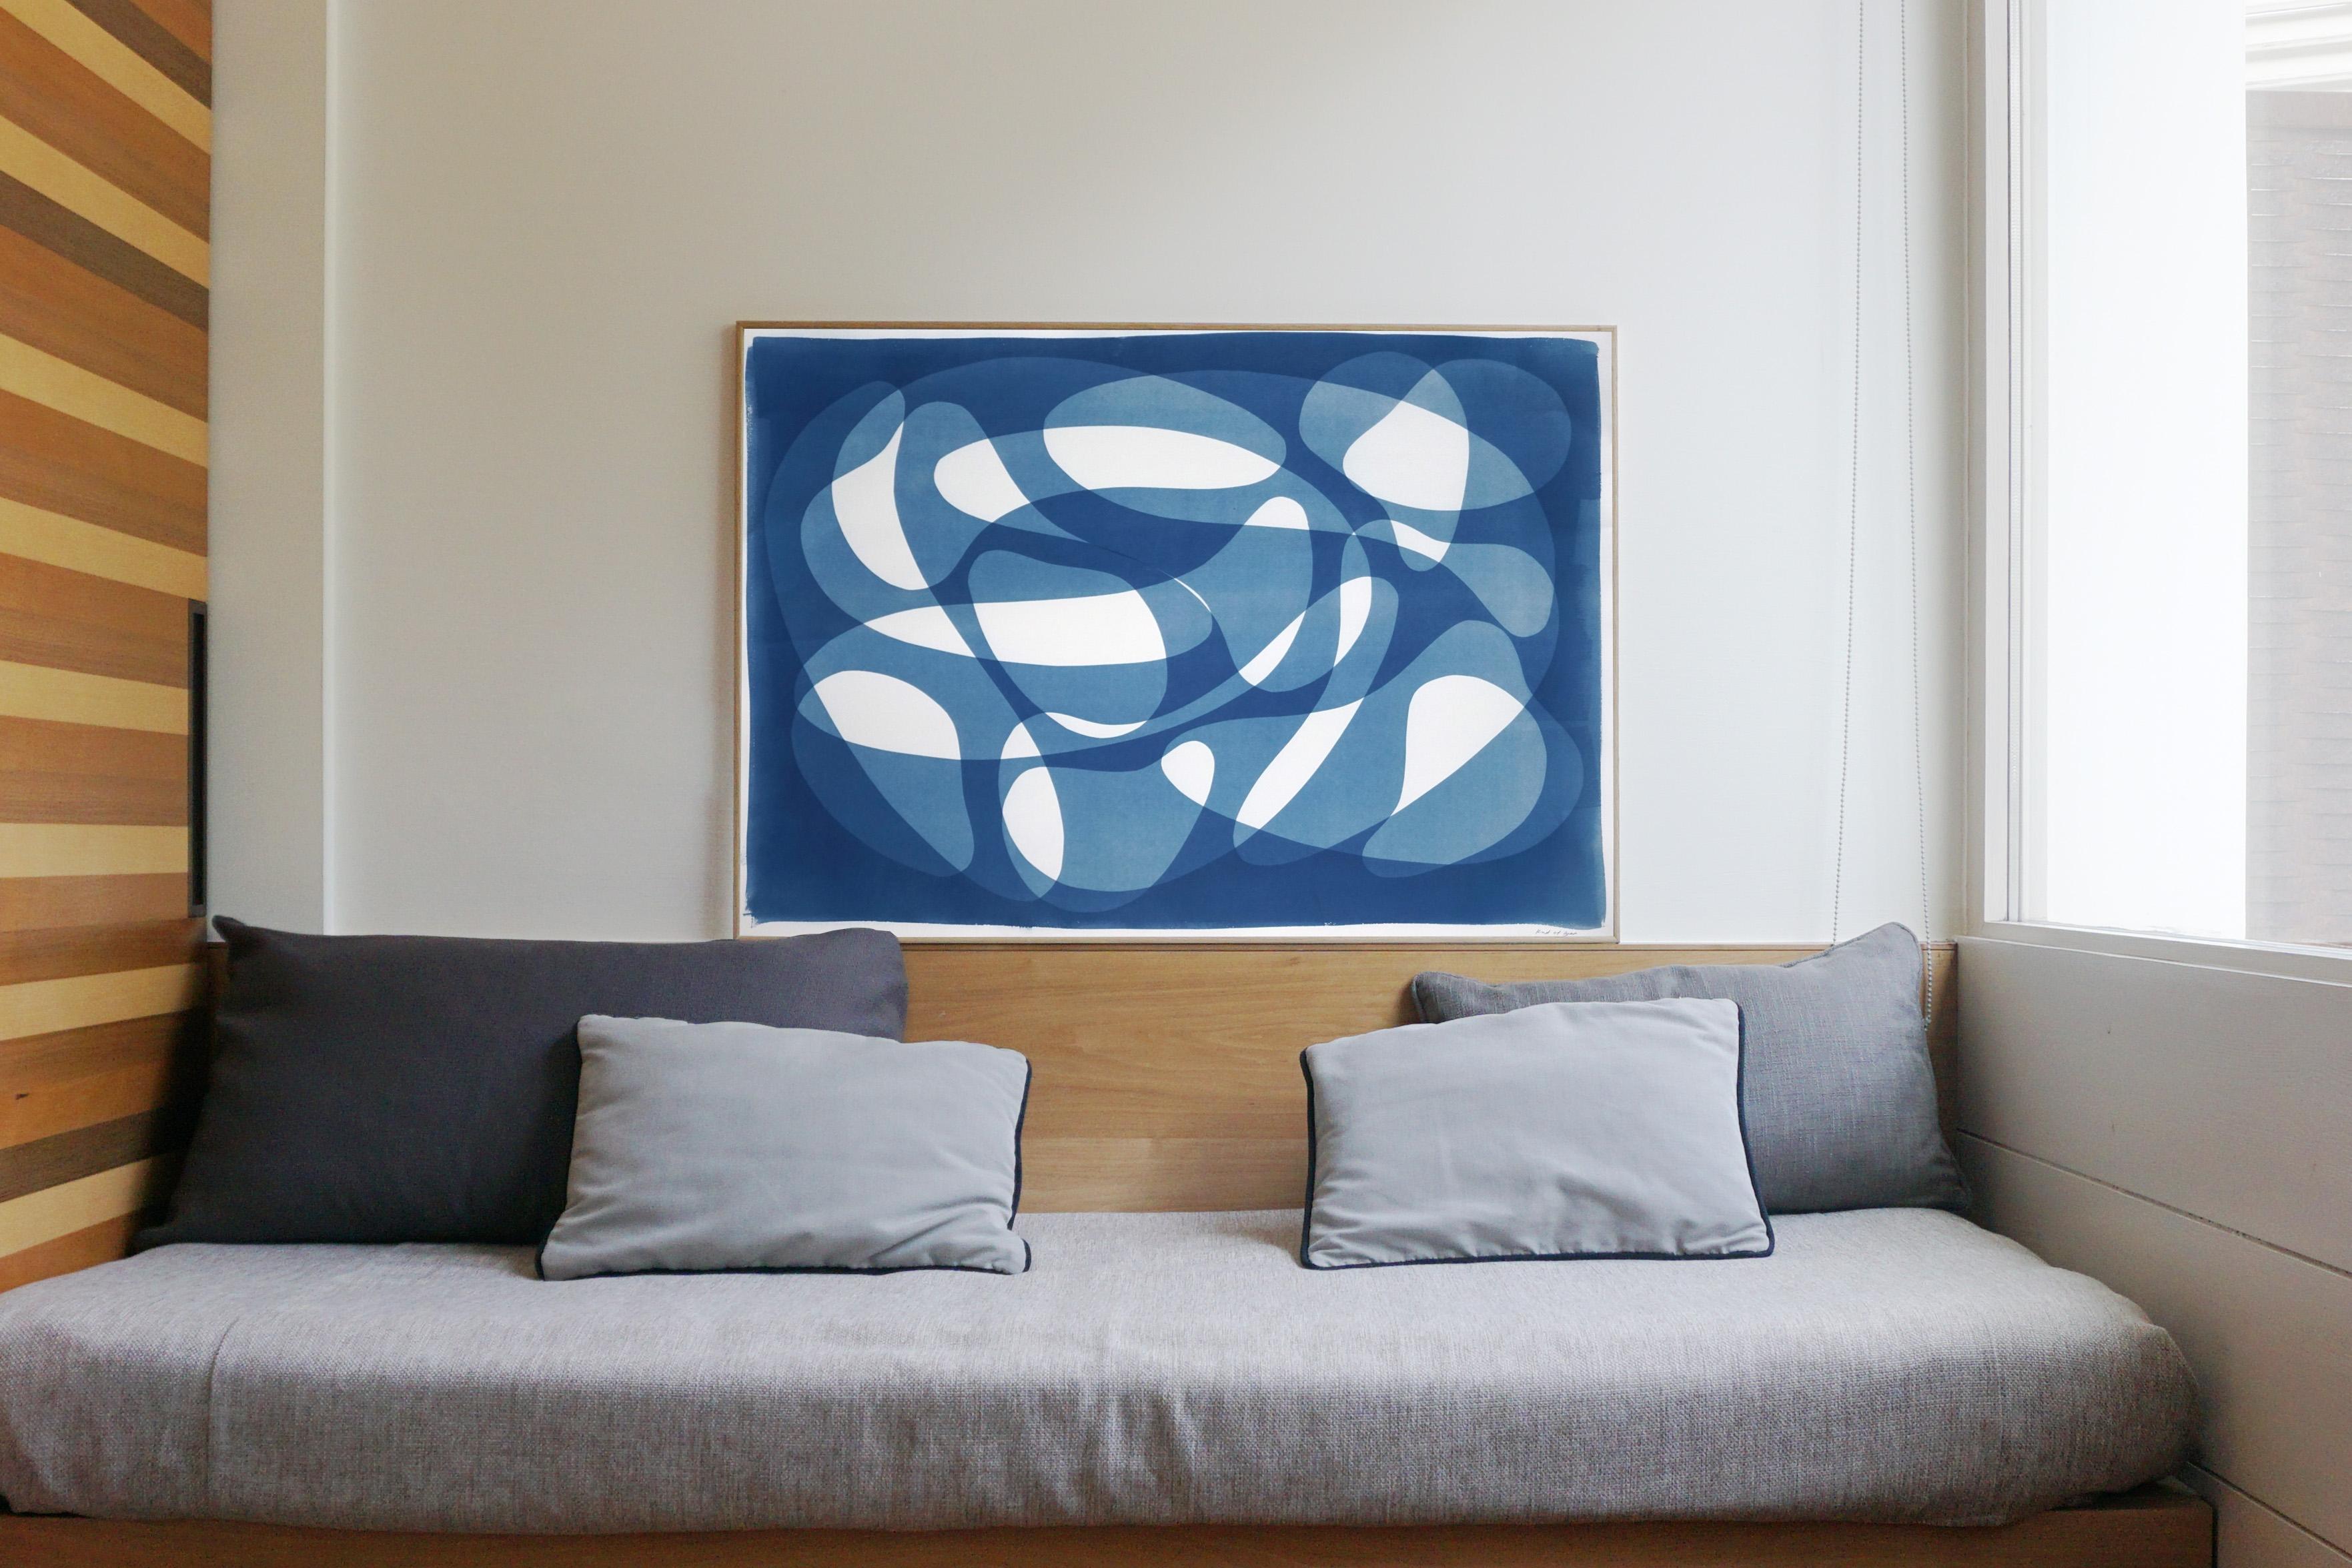 This is an exclusive handprinted unique cyanotype that takes its inspiration from the mid-century modern shapes.
It's made by layering paper cutouts and different exposures using uv-light. 

Details:
+ Title: Underwater Whirlpool 
+ Year: 2021
+